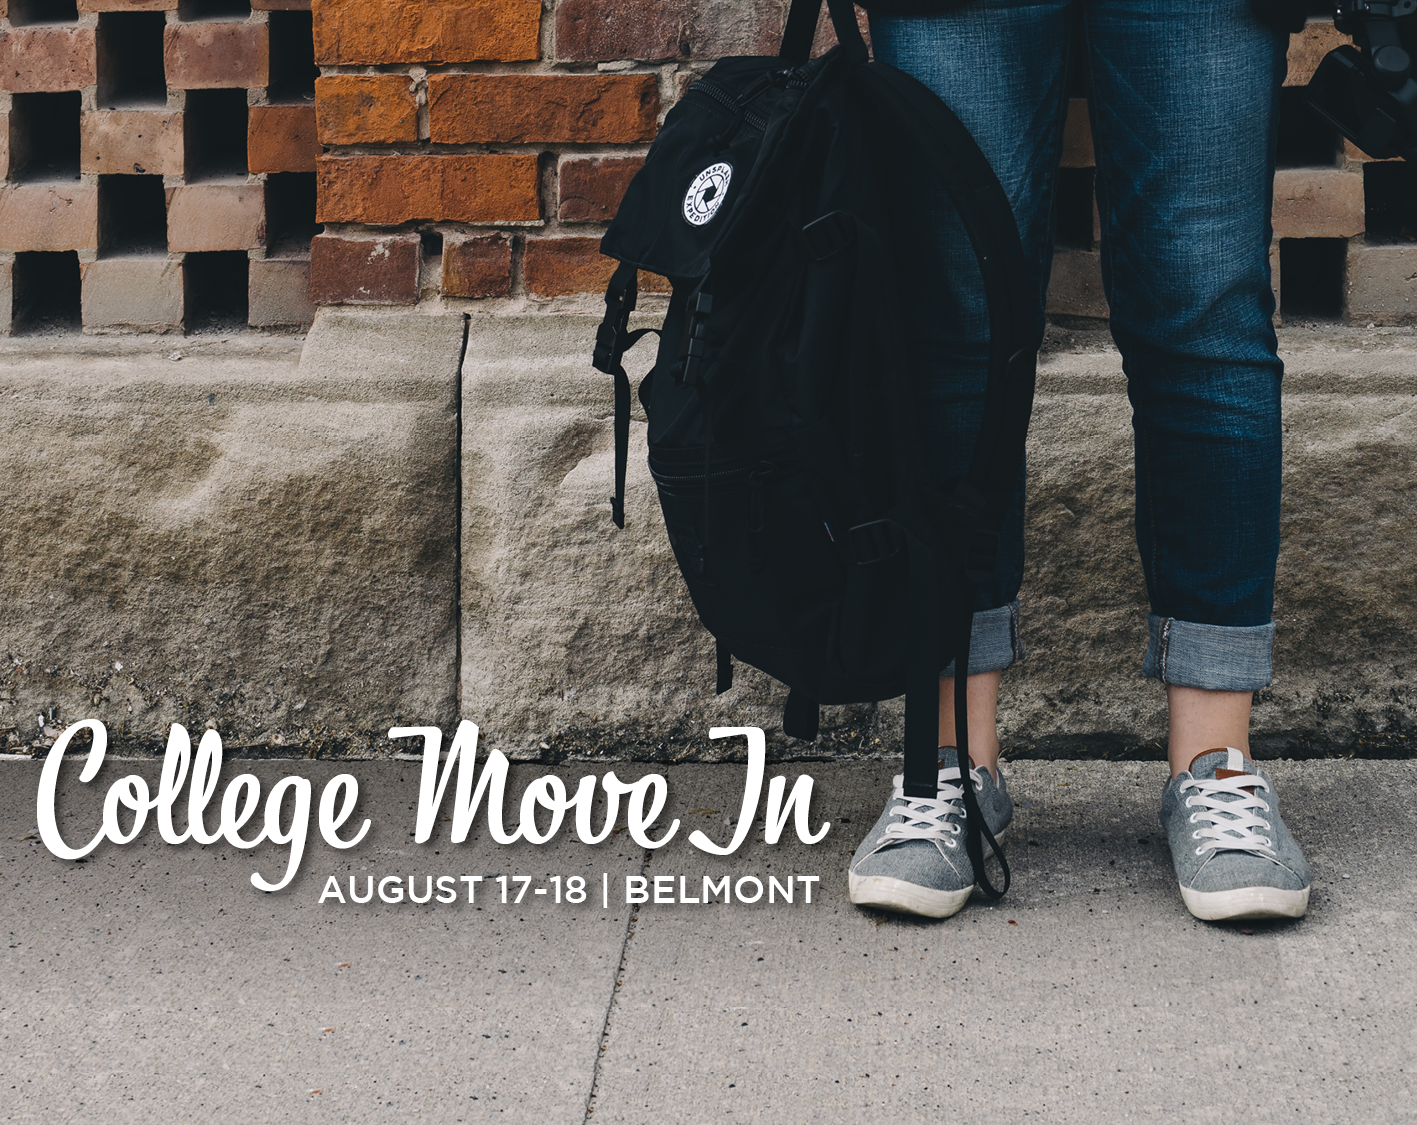 College Move In at Belmont 